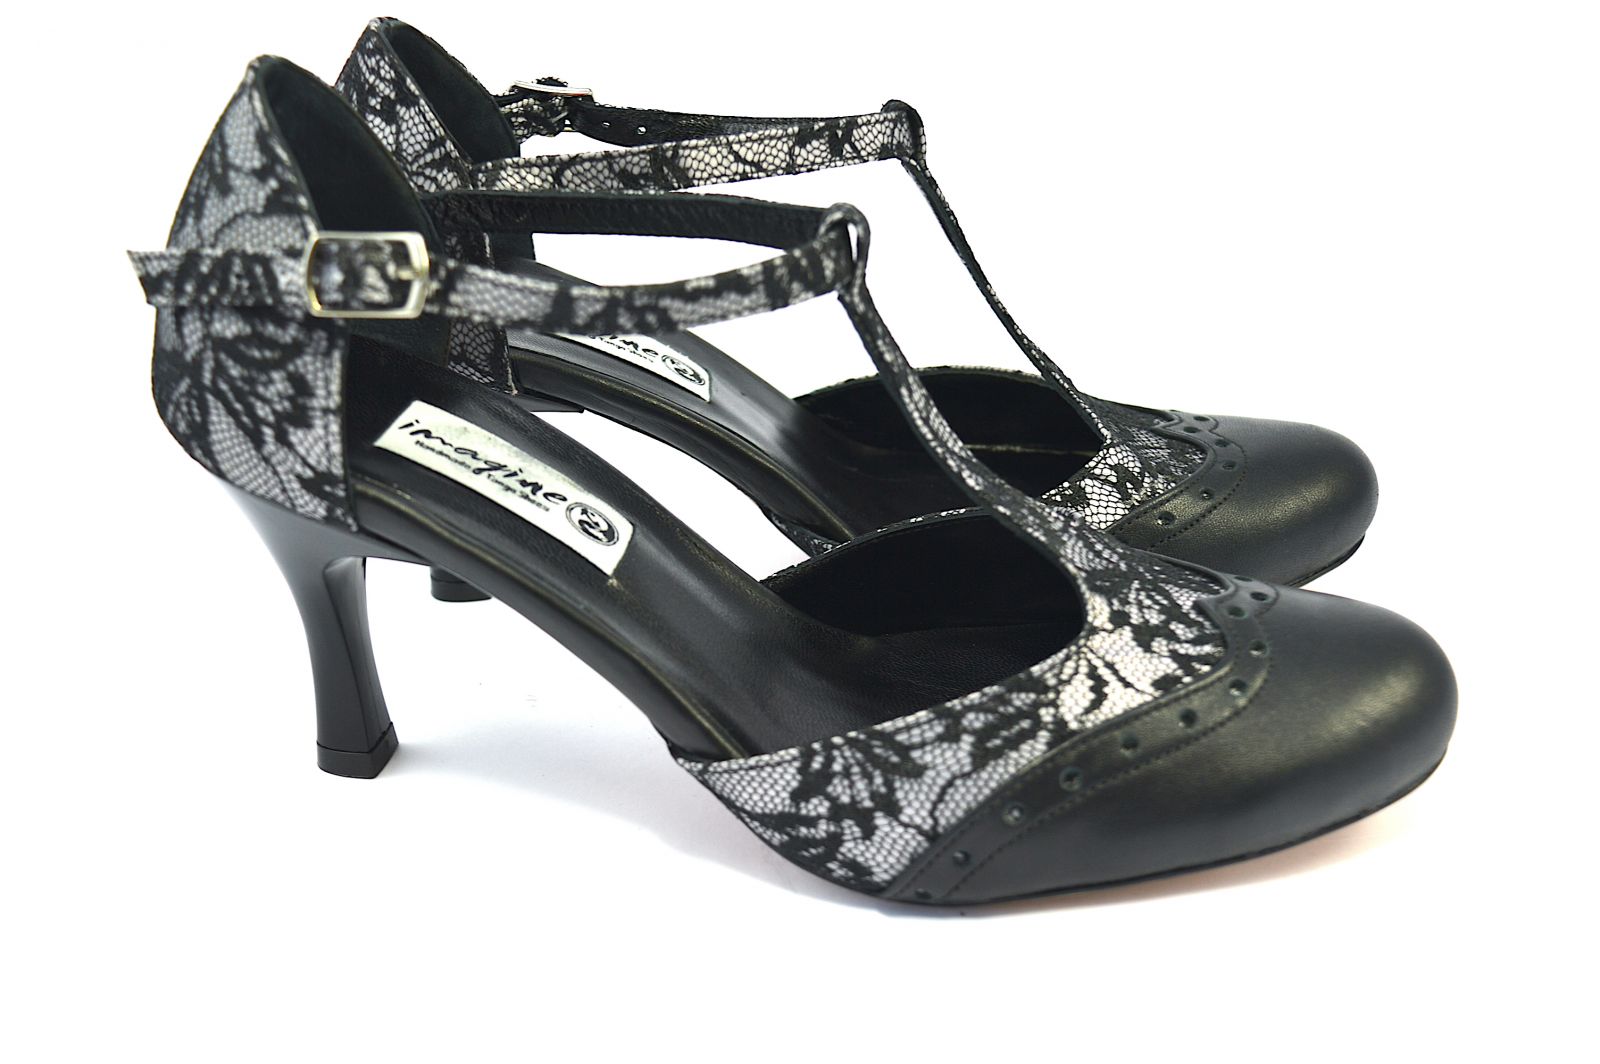 Women's Tango Shoe, closed toe style, with black lace and black soft leather